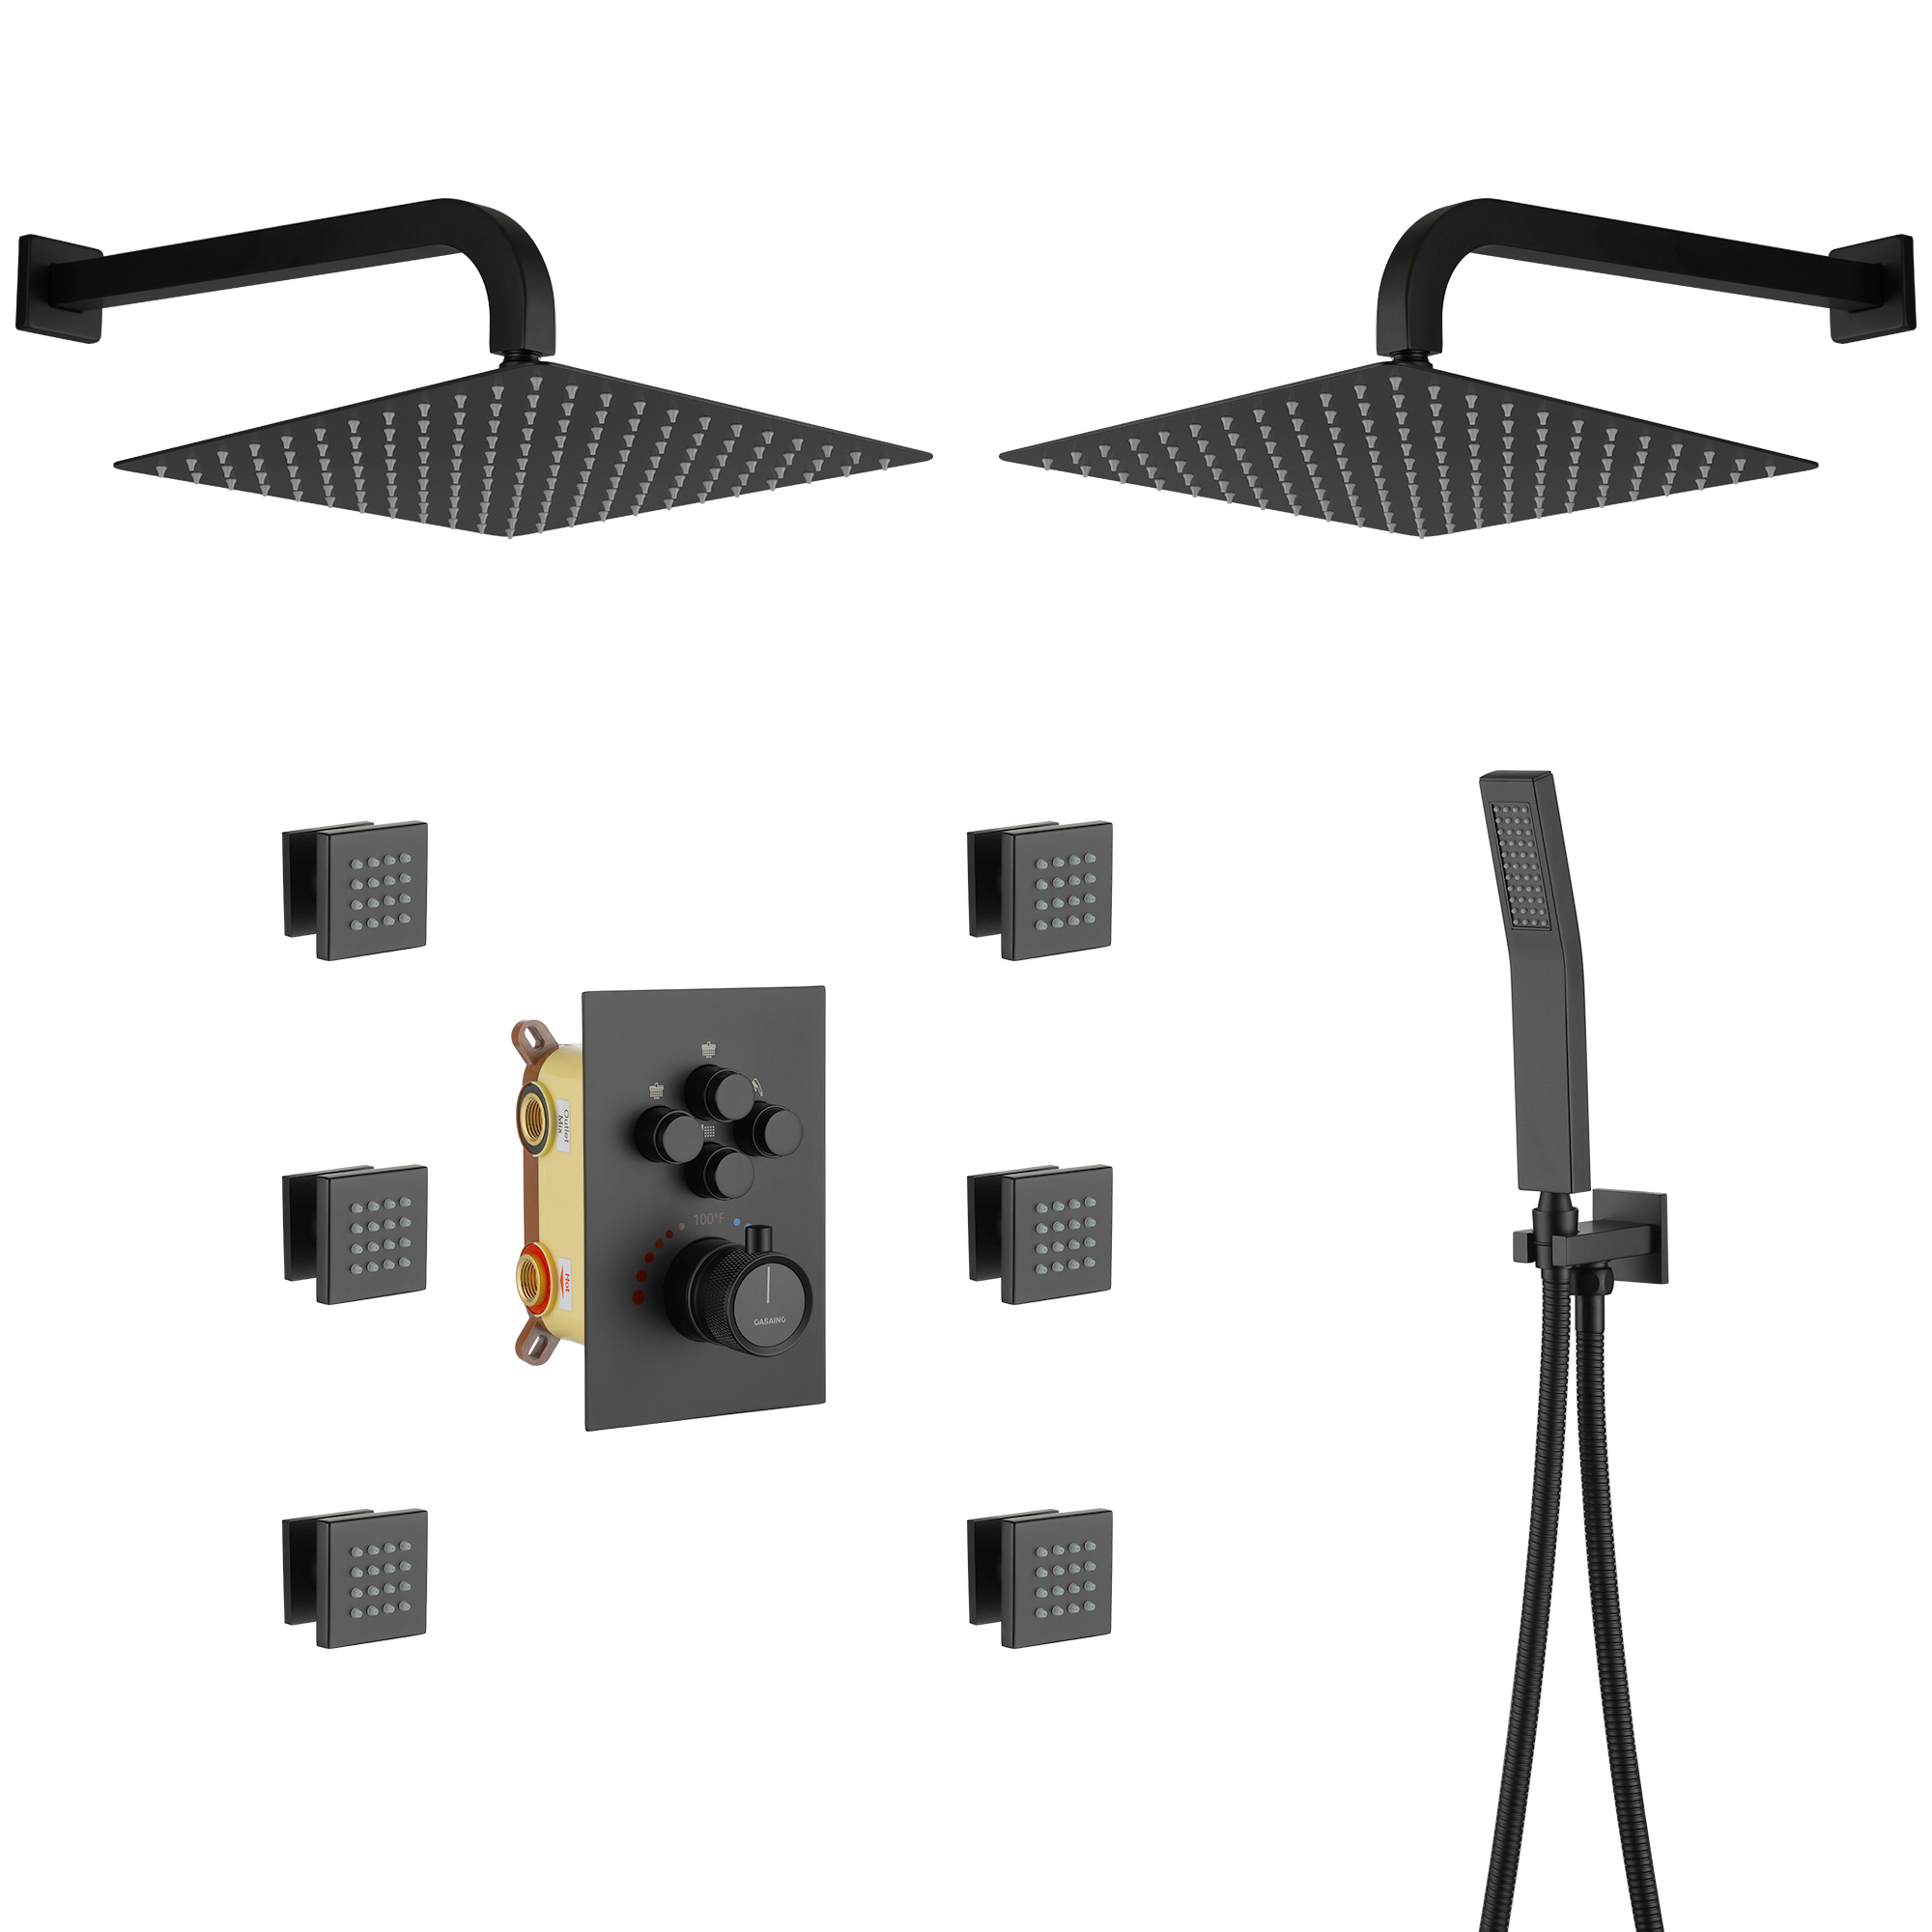 Dual Shower Head System 12-inch Wall Mount Rainfall Shower System Deluxe Shower System Rain Shower Head System with Multiple Shower Heads & Massage Functions